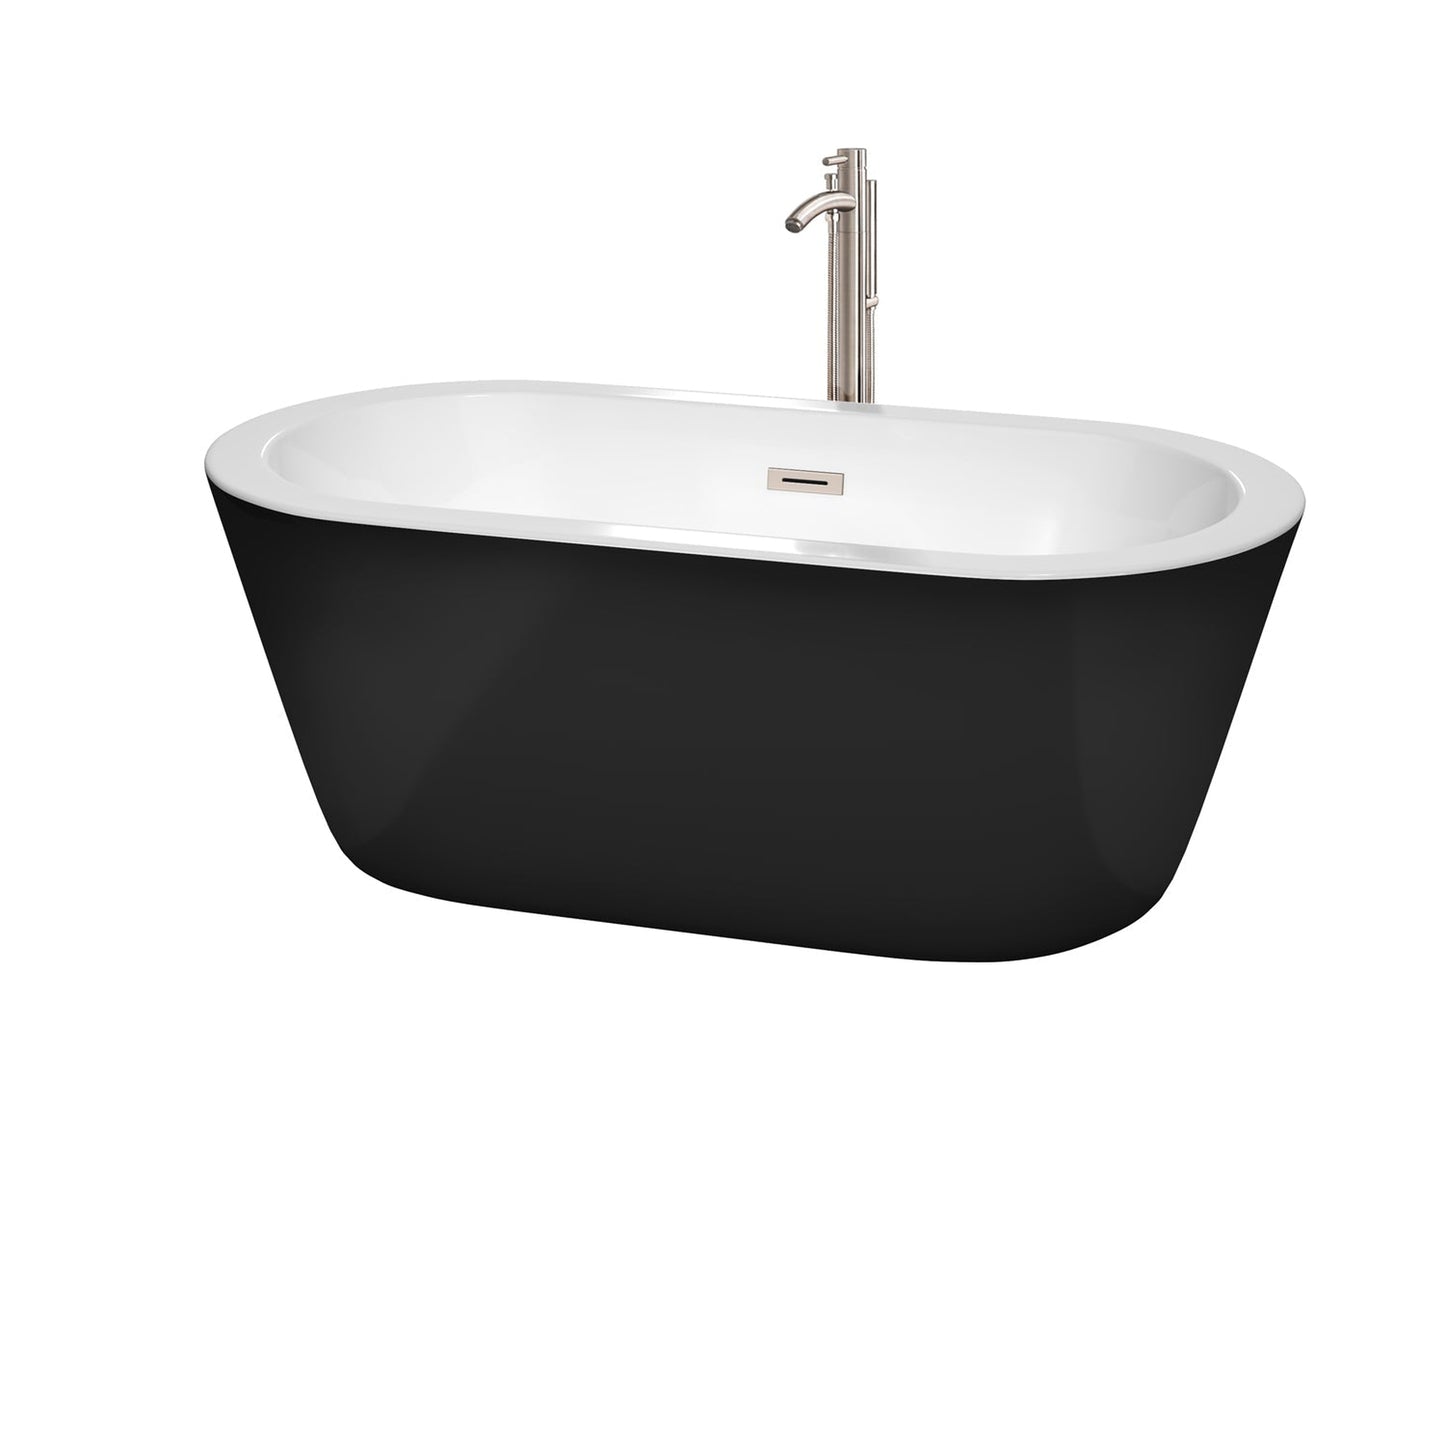 Wyndham Collection Mermaid 60" Freestanding Bathtub in Black With White Interior With Floor Mounted Faucet, Drain and Overflow Trim in Brushed Nickel